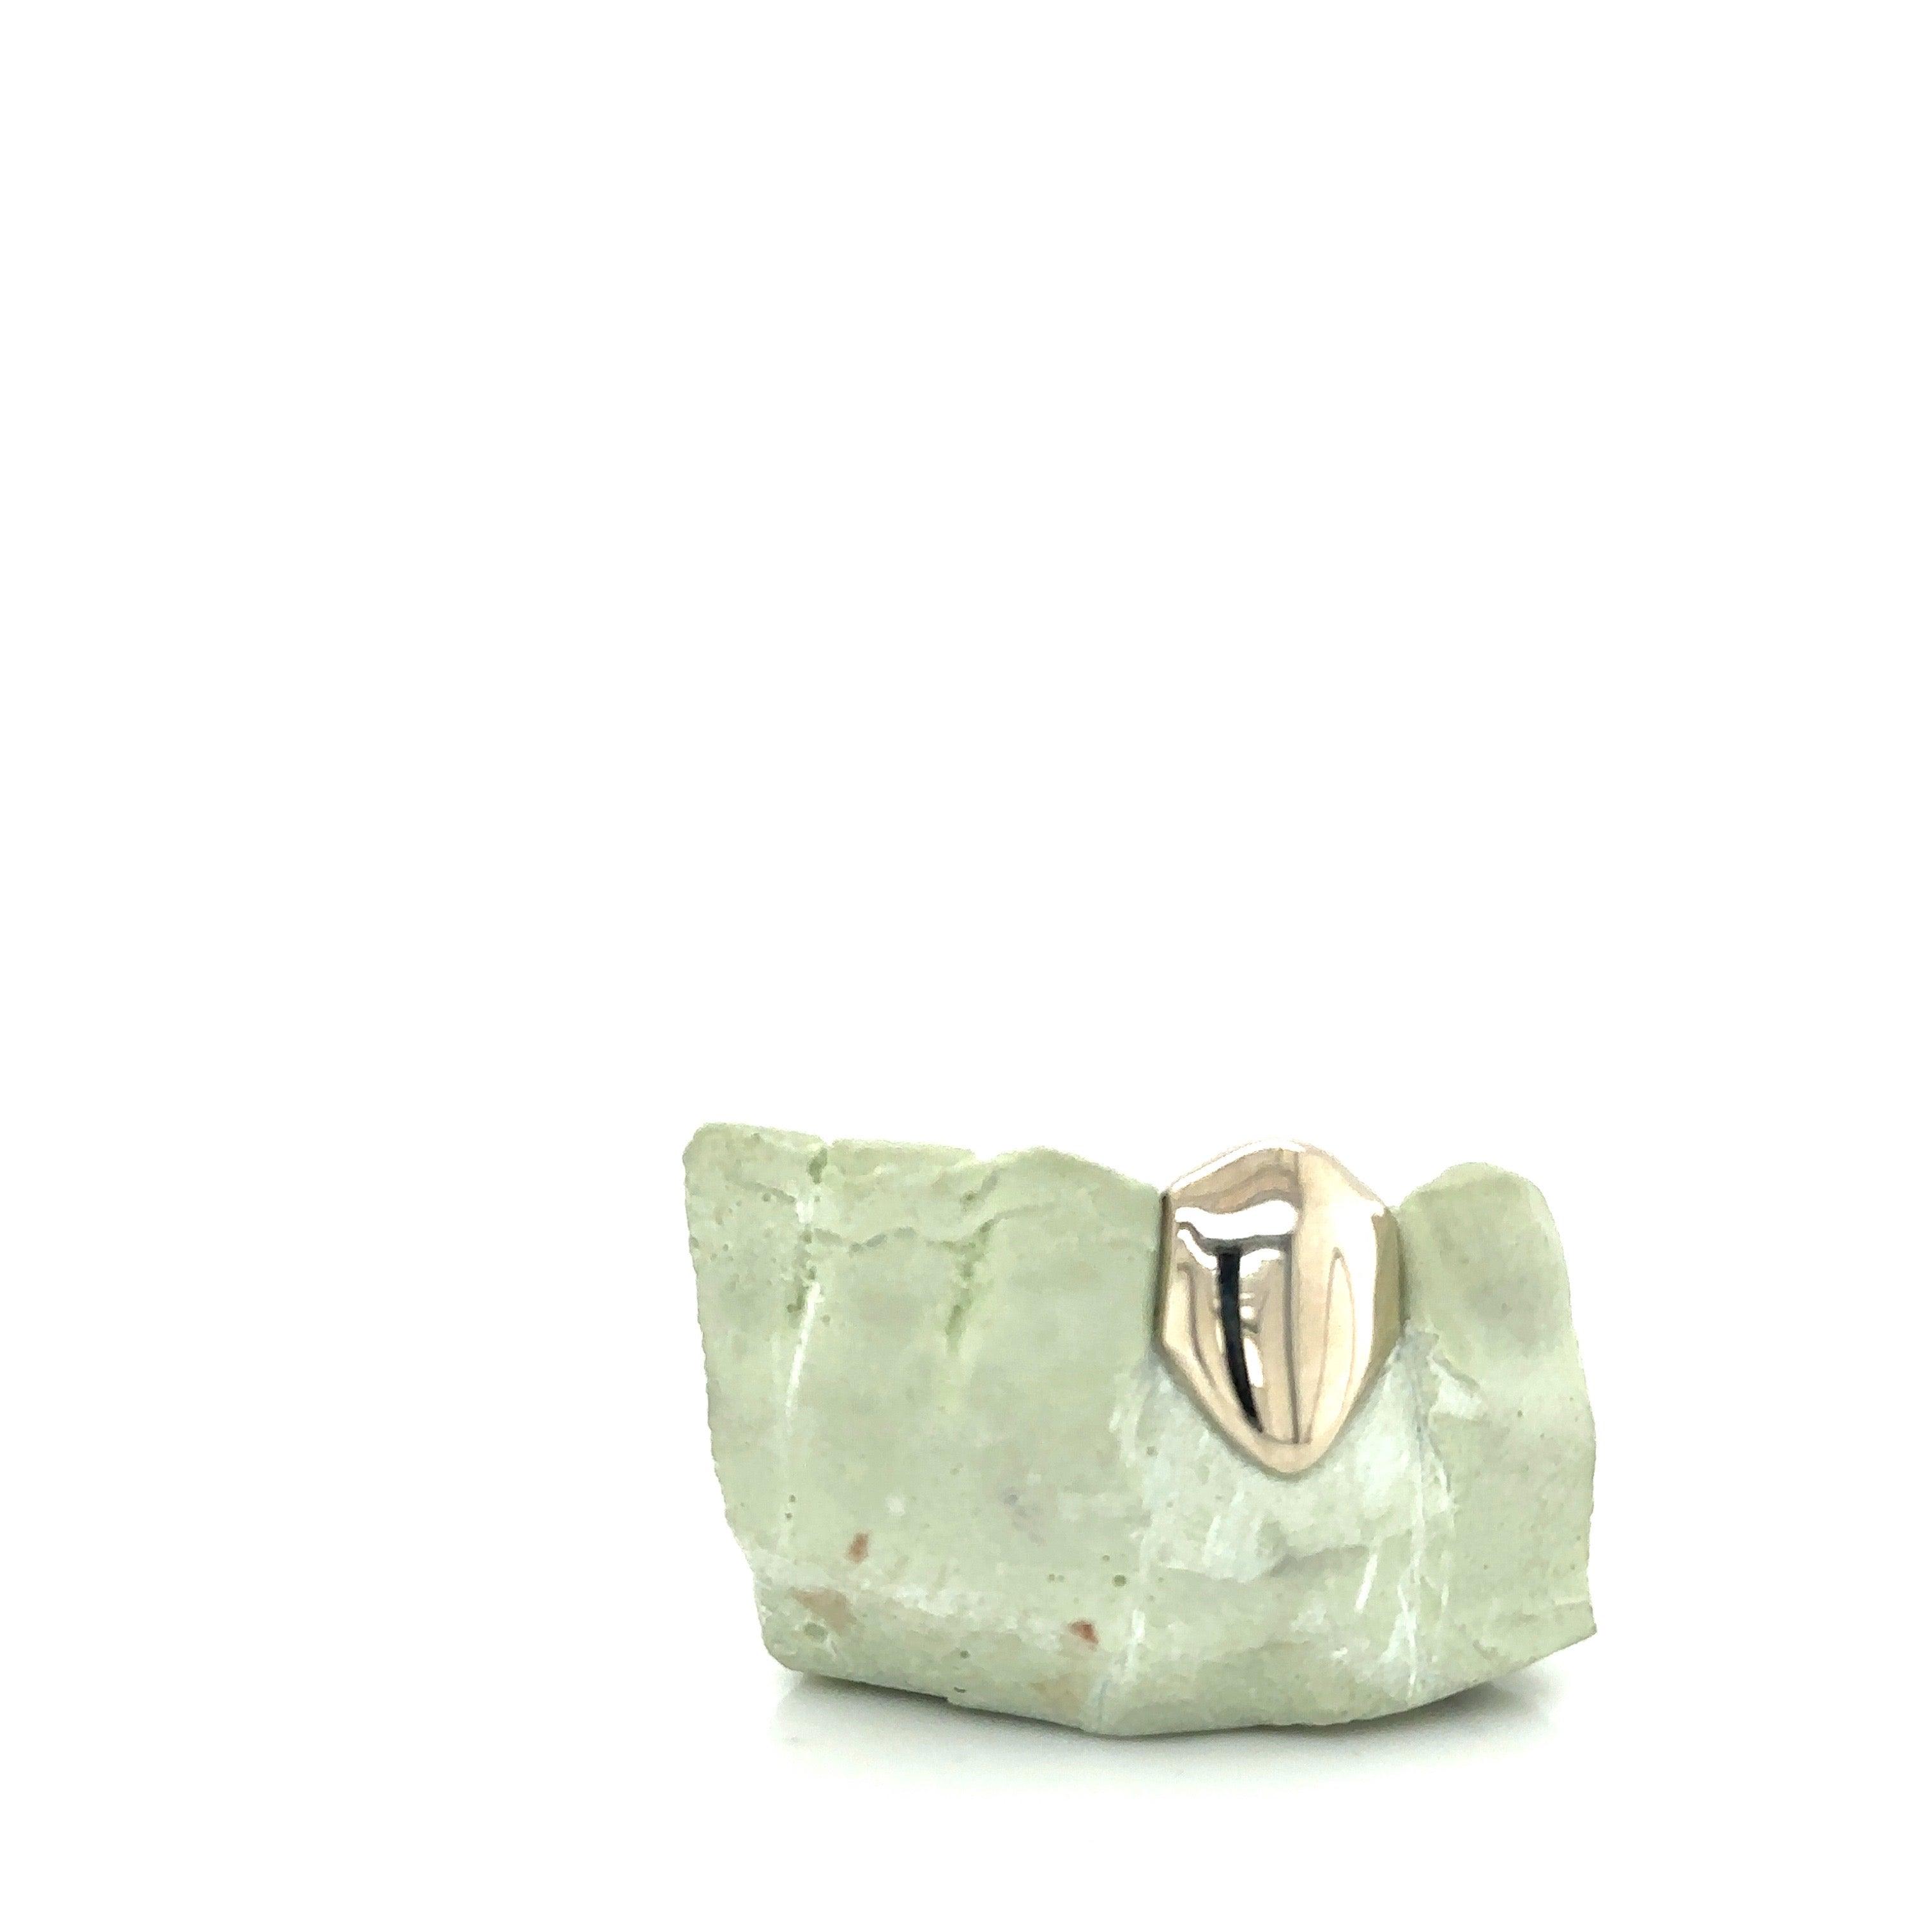 White Gold Left Side Incisor Tooth - Seattle Gold Grillz